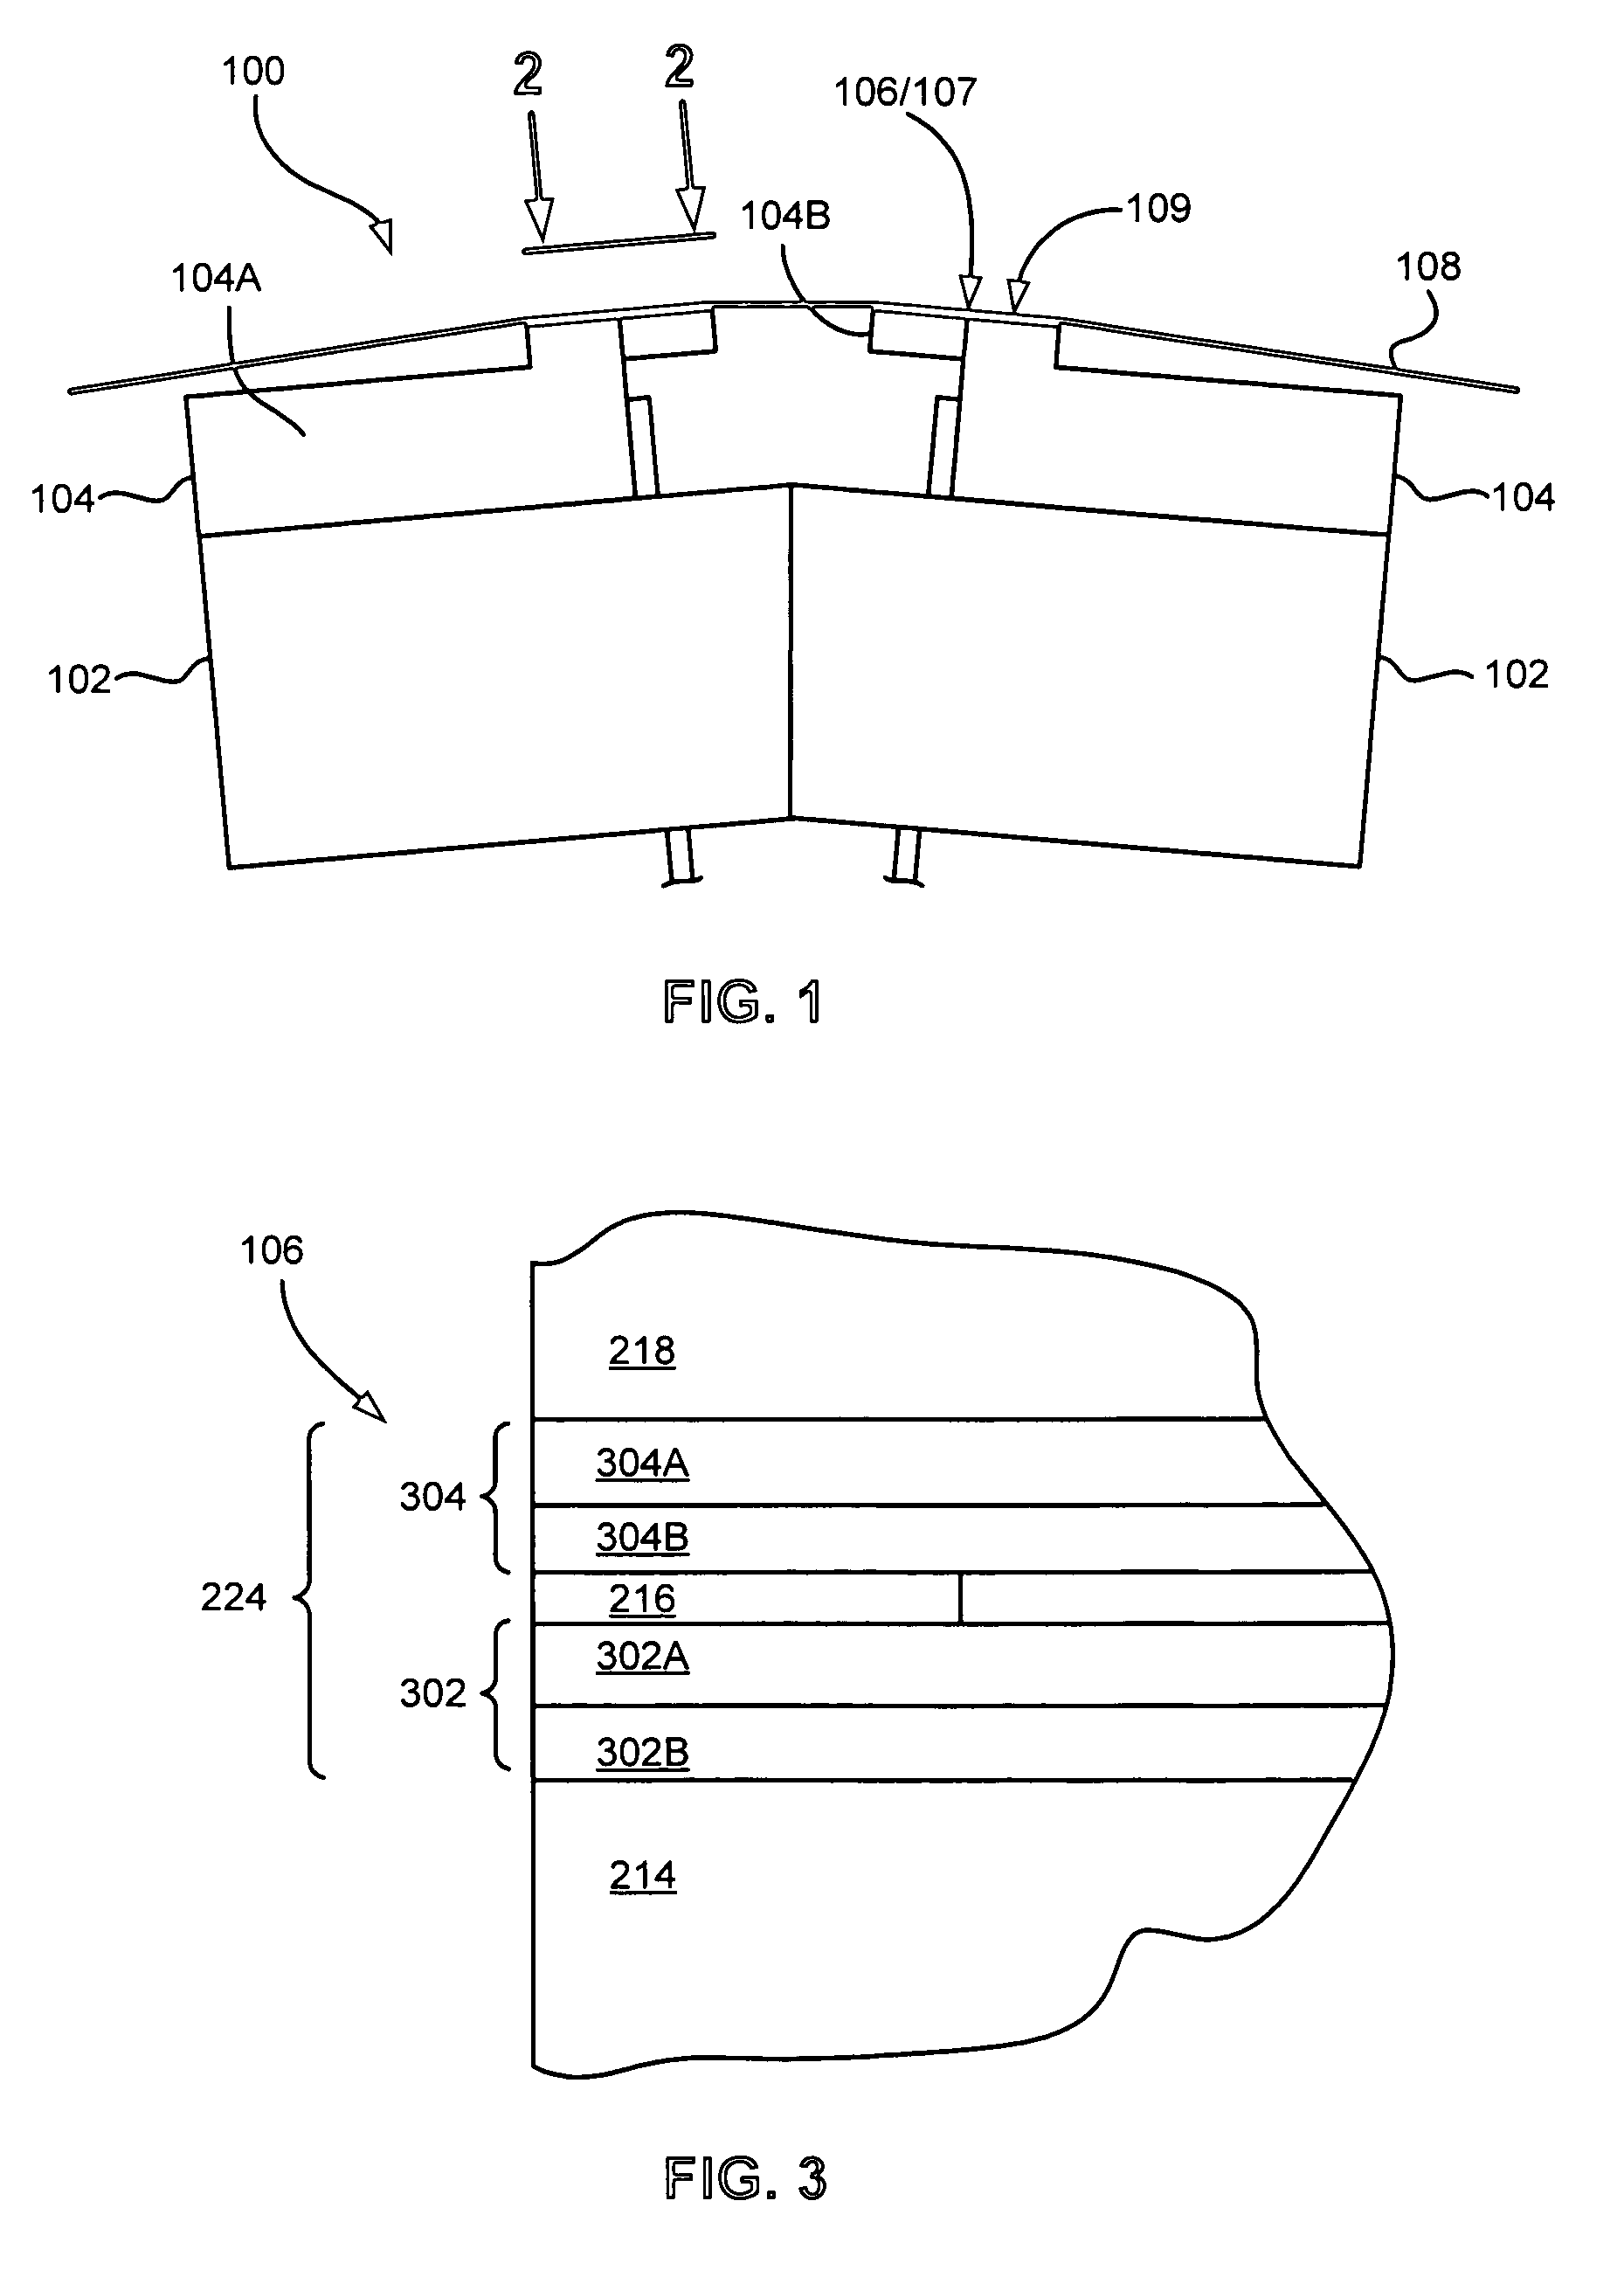 Magnetic head having selectively defined reader gap thicknesses